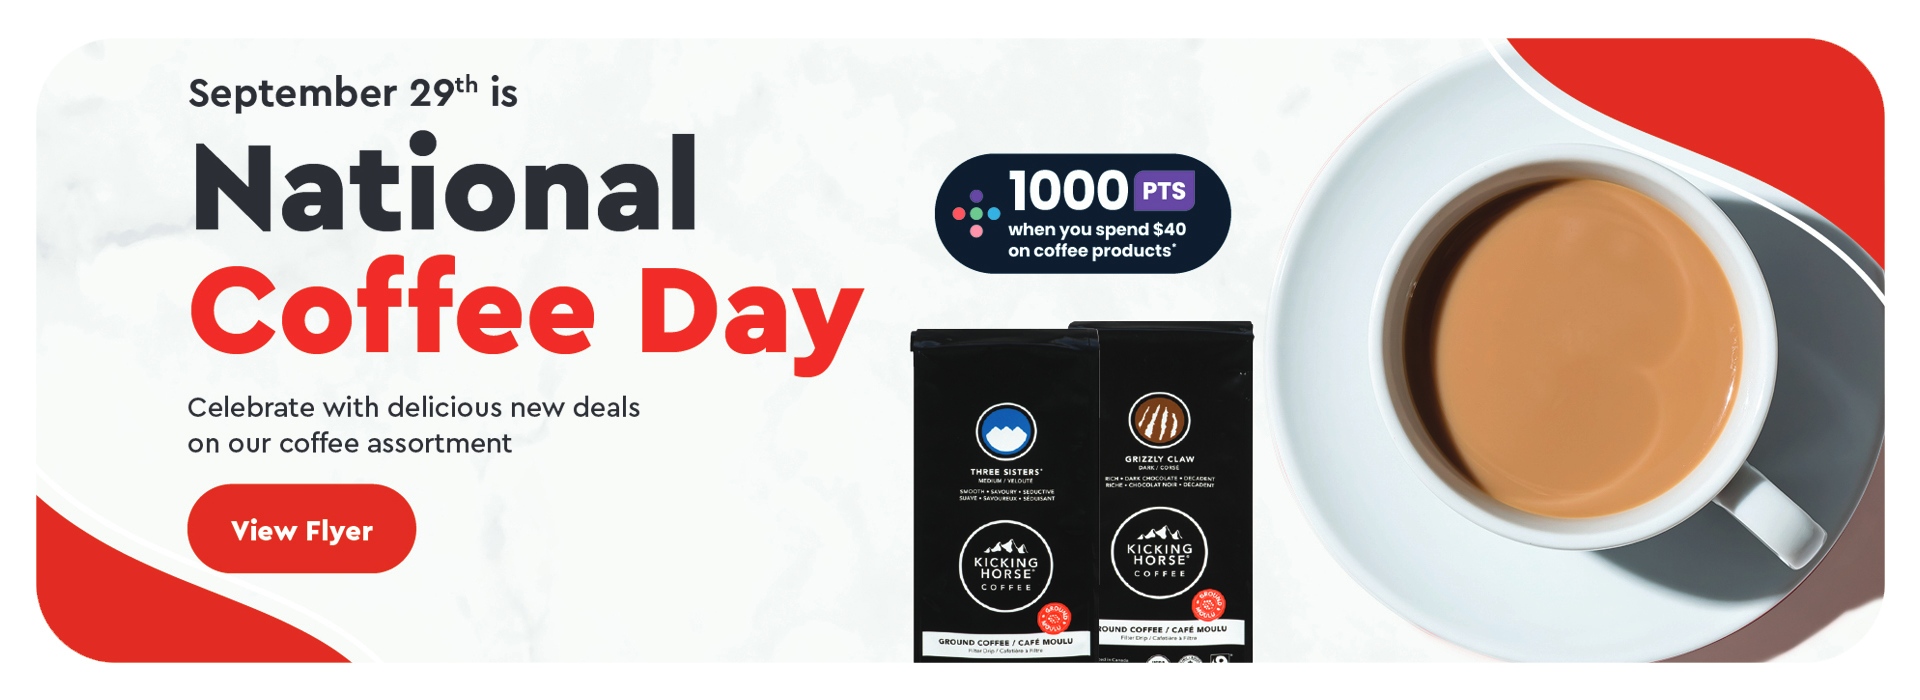 Sept 29 is National Coffee day